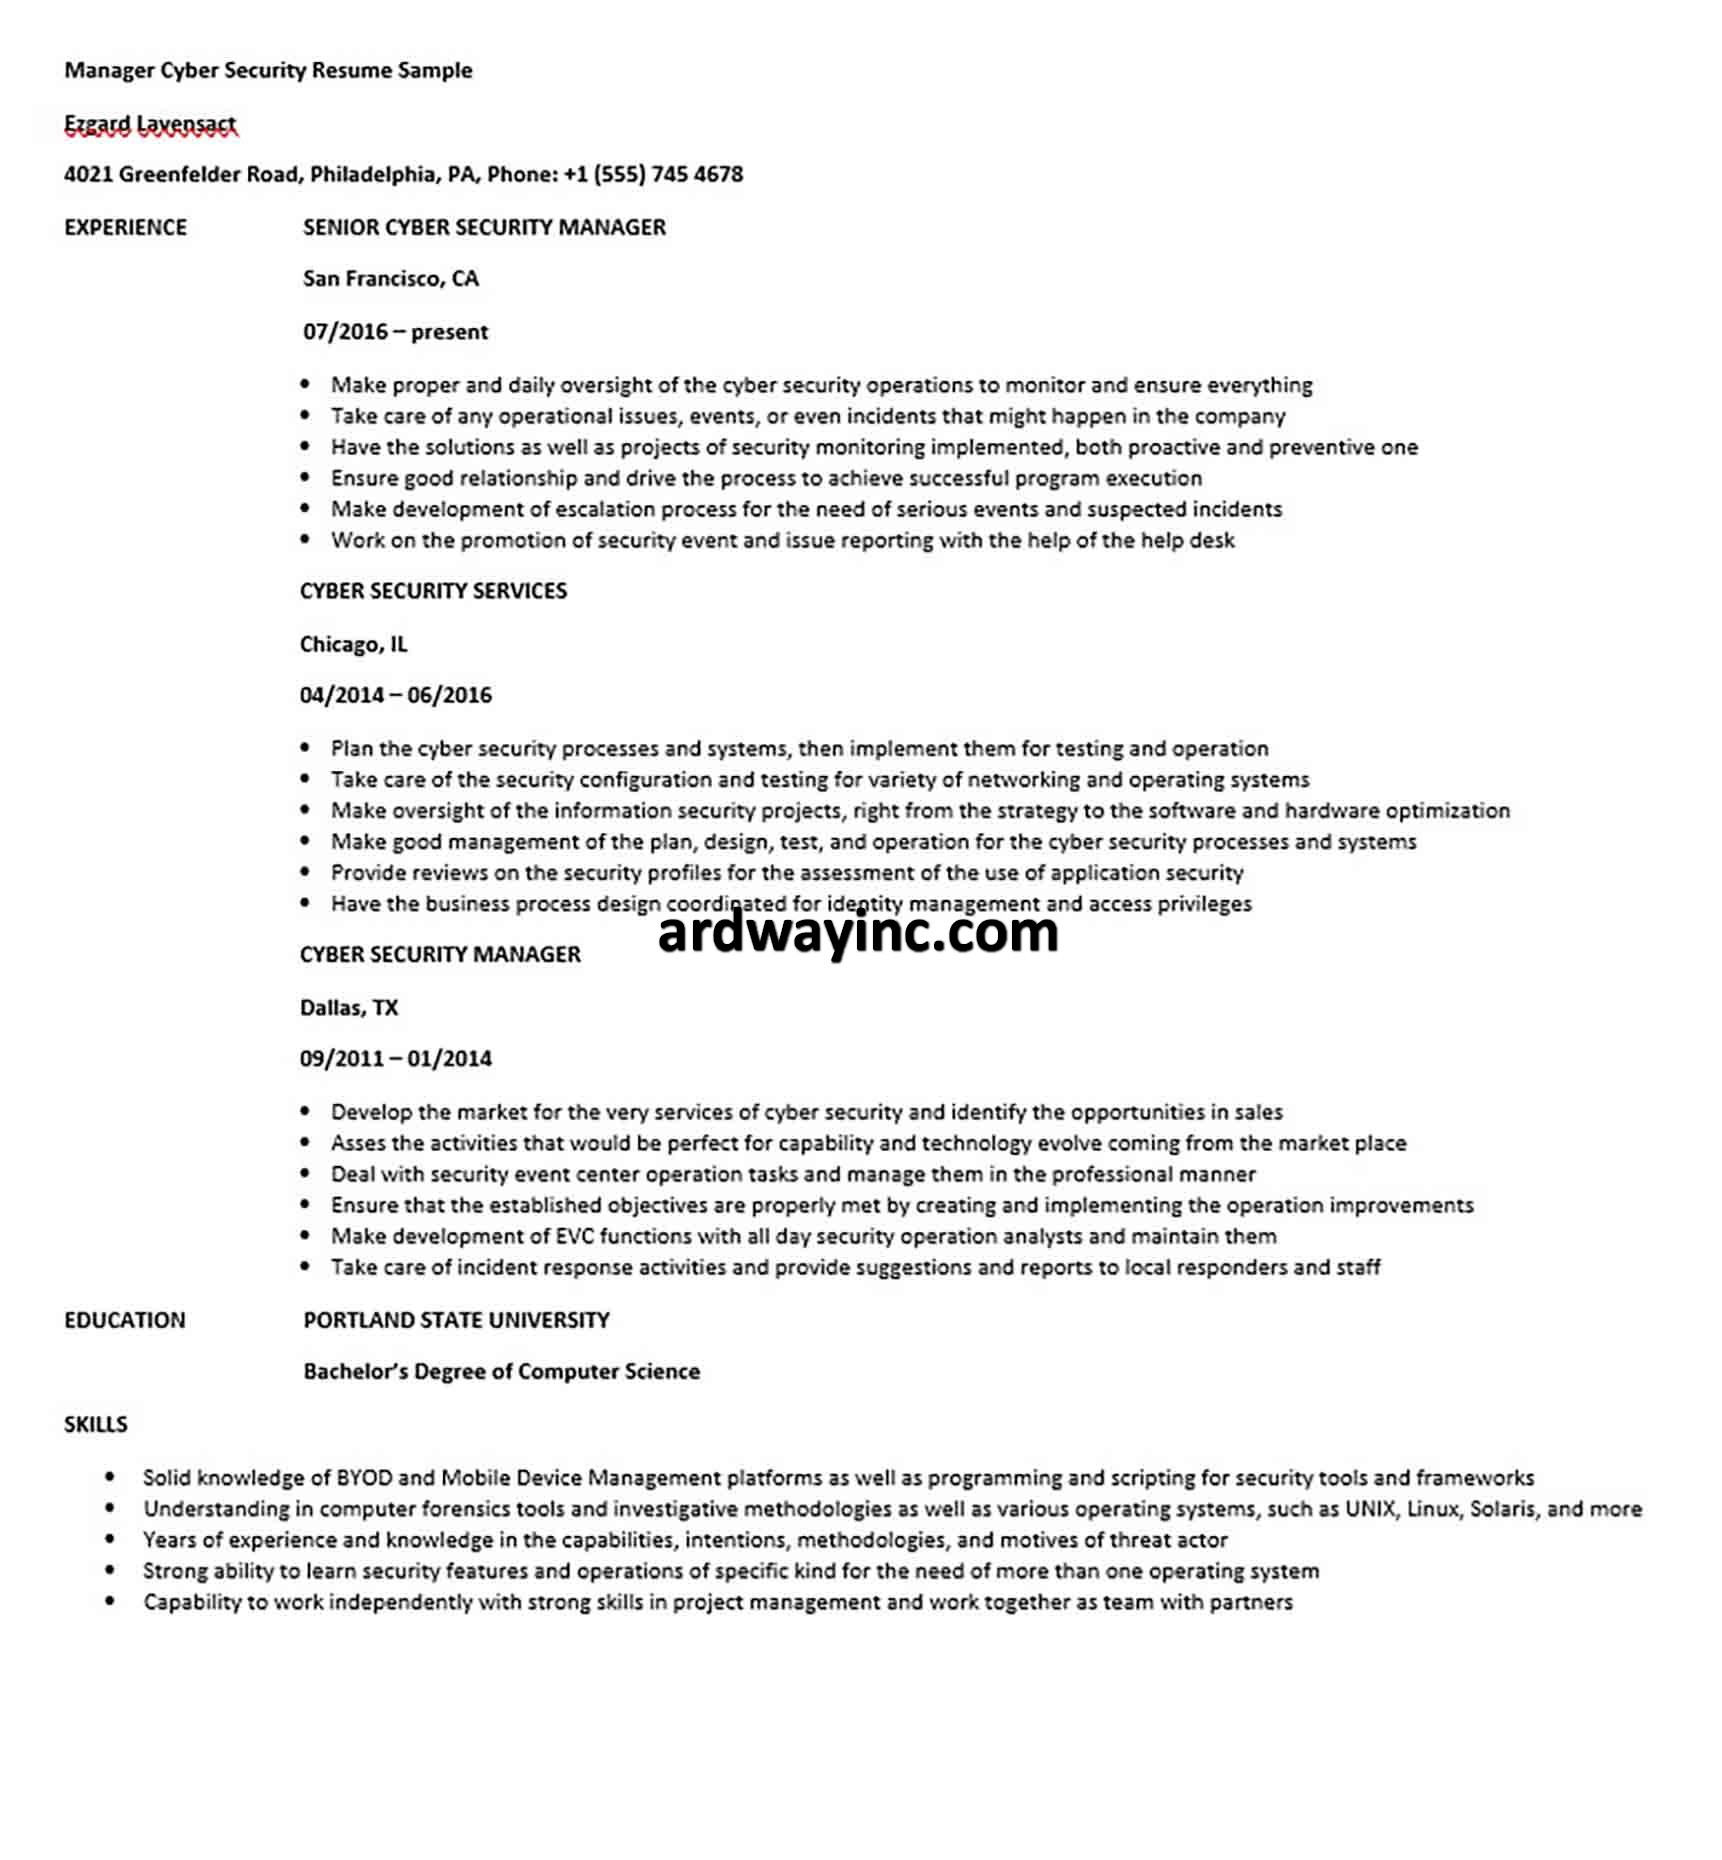 Manager Cyber Security Resume Sample